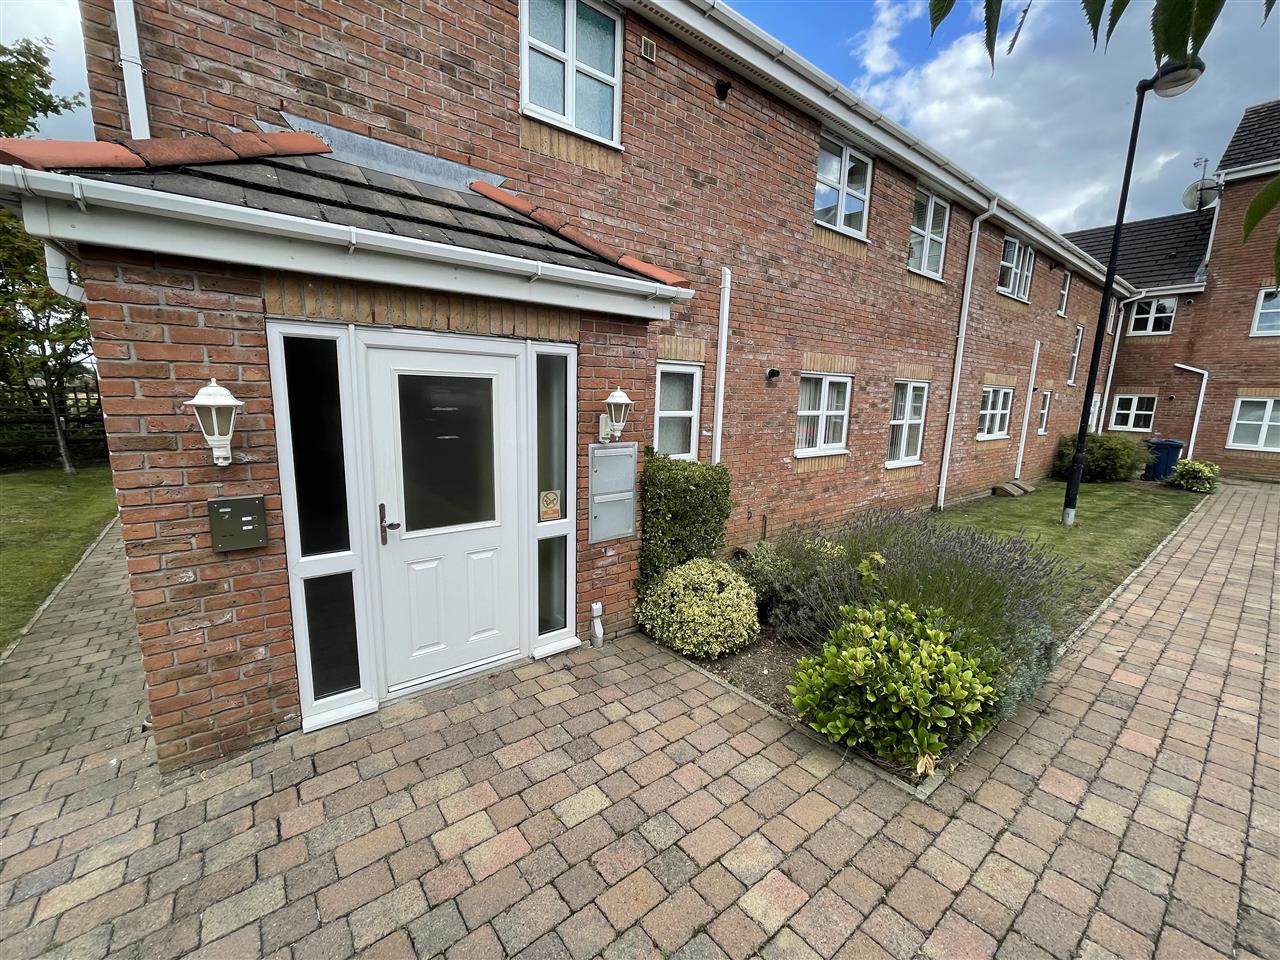 2 bed apartment to rent in Delph Drive, Burscough - Property Image 1